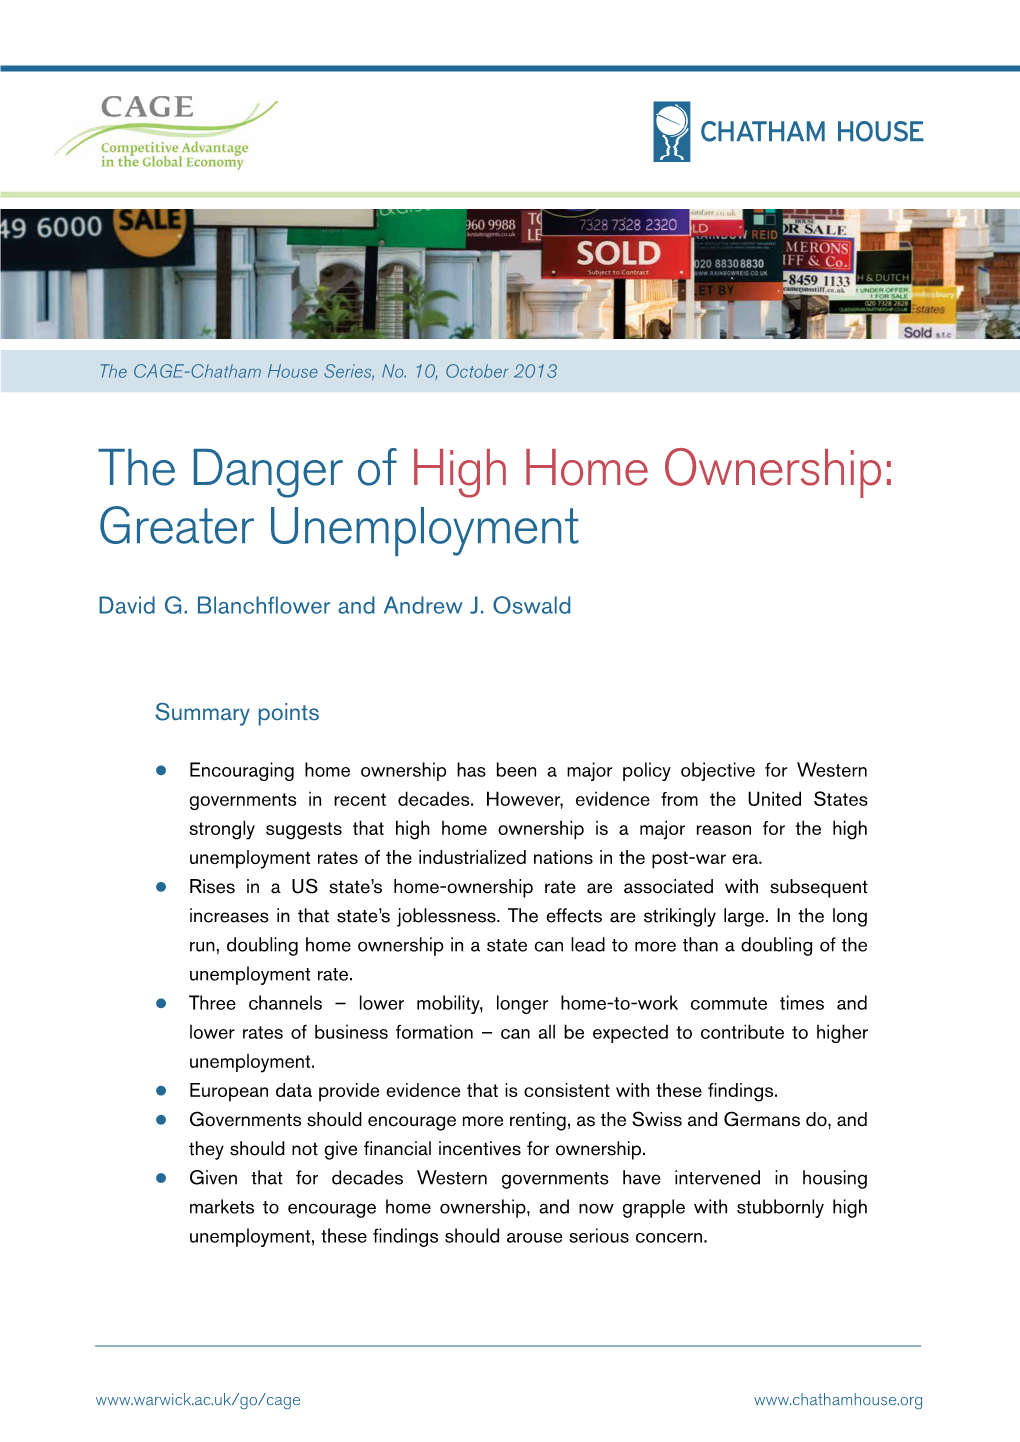 The Danger of High Home Ownership: Greater Unemployment